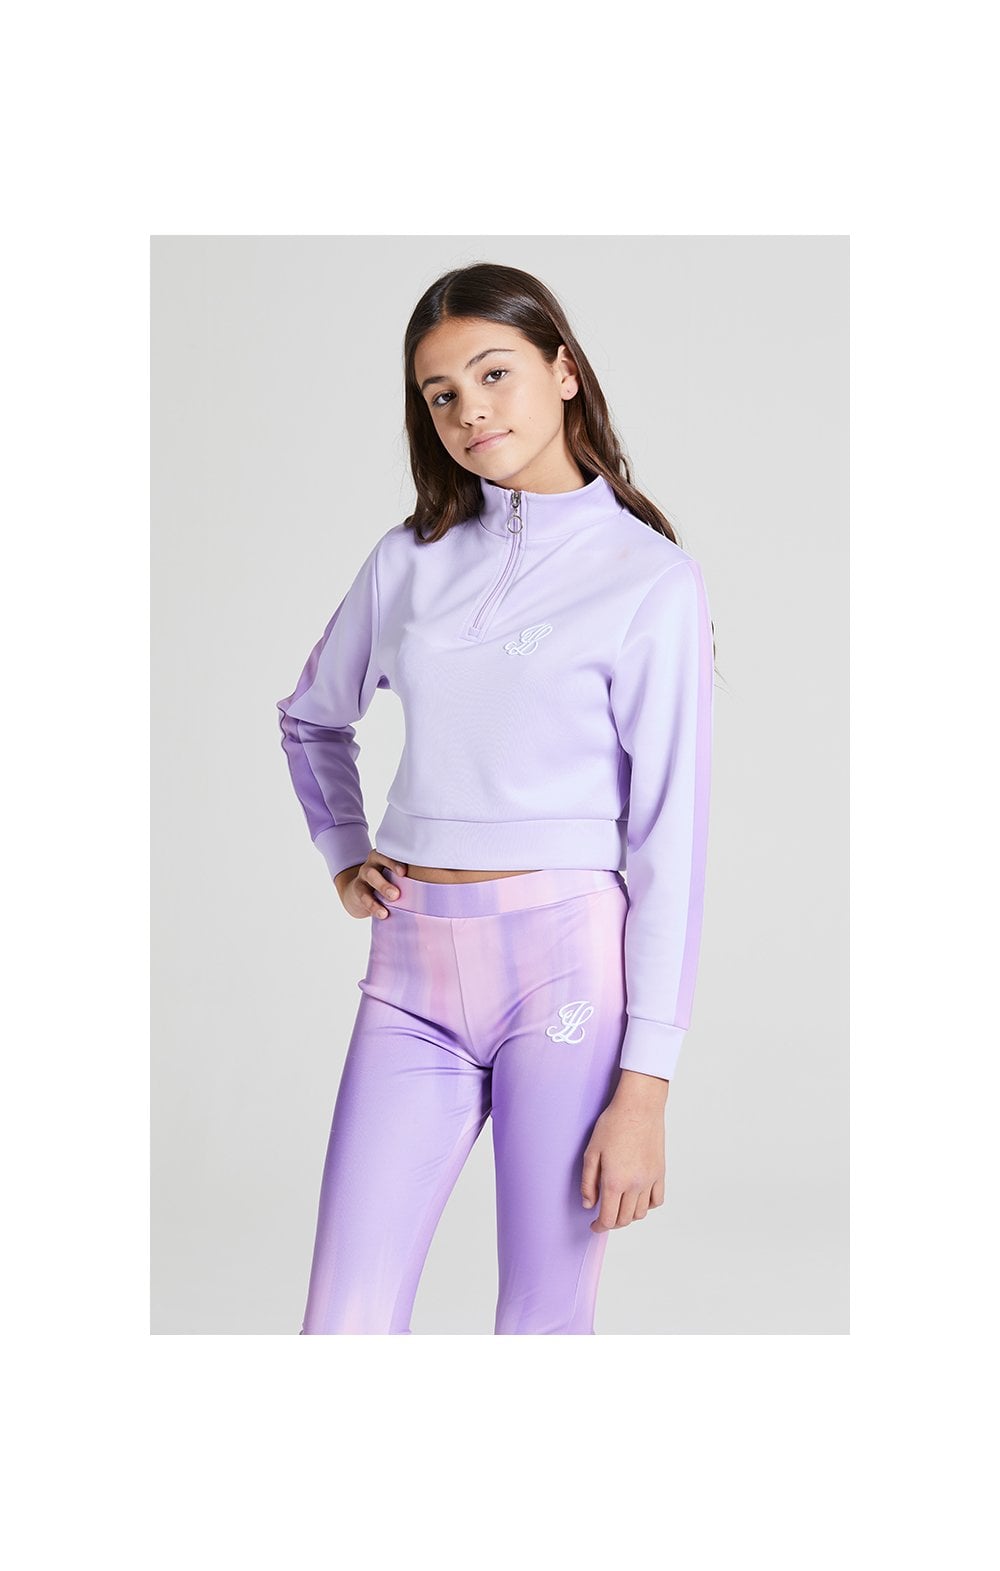 Load image into Gallery viewer, Girls Illusive Lavender Cropped 1/4 Zip Hoodie (1)